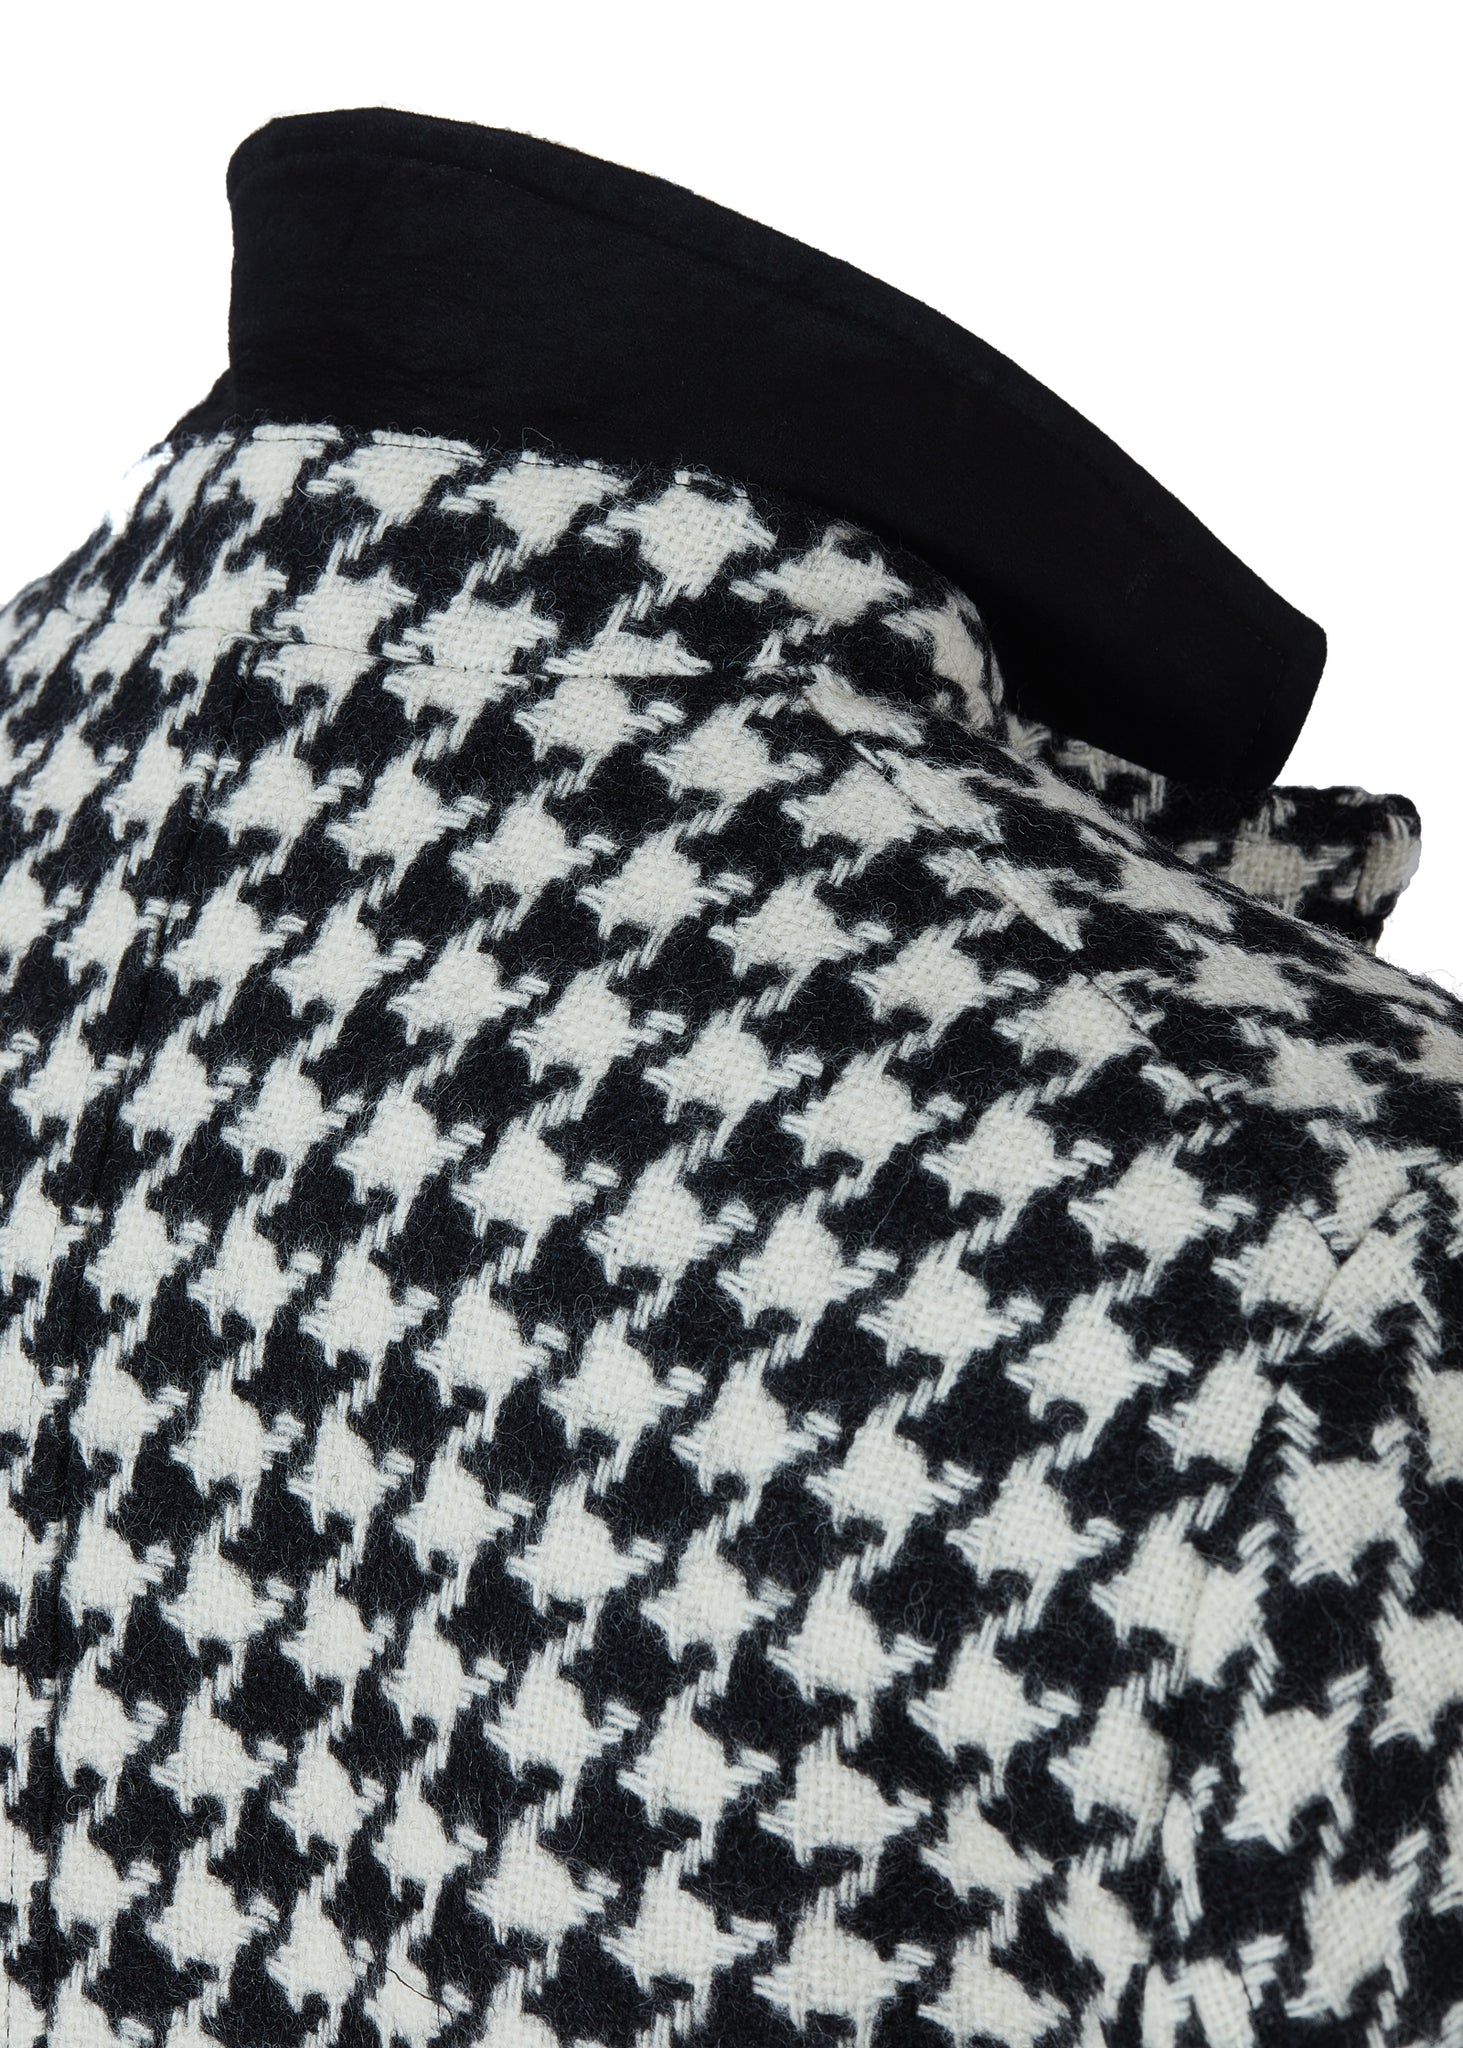 Black and White Houndstooth mens tweed coat with collar popped to show black under collar